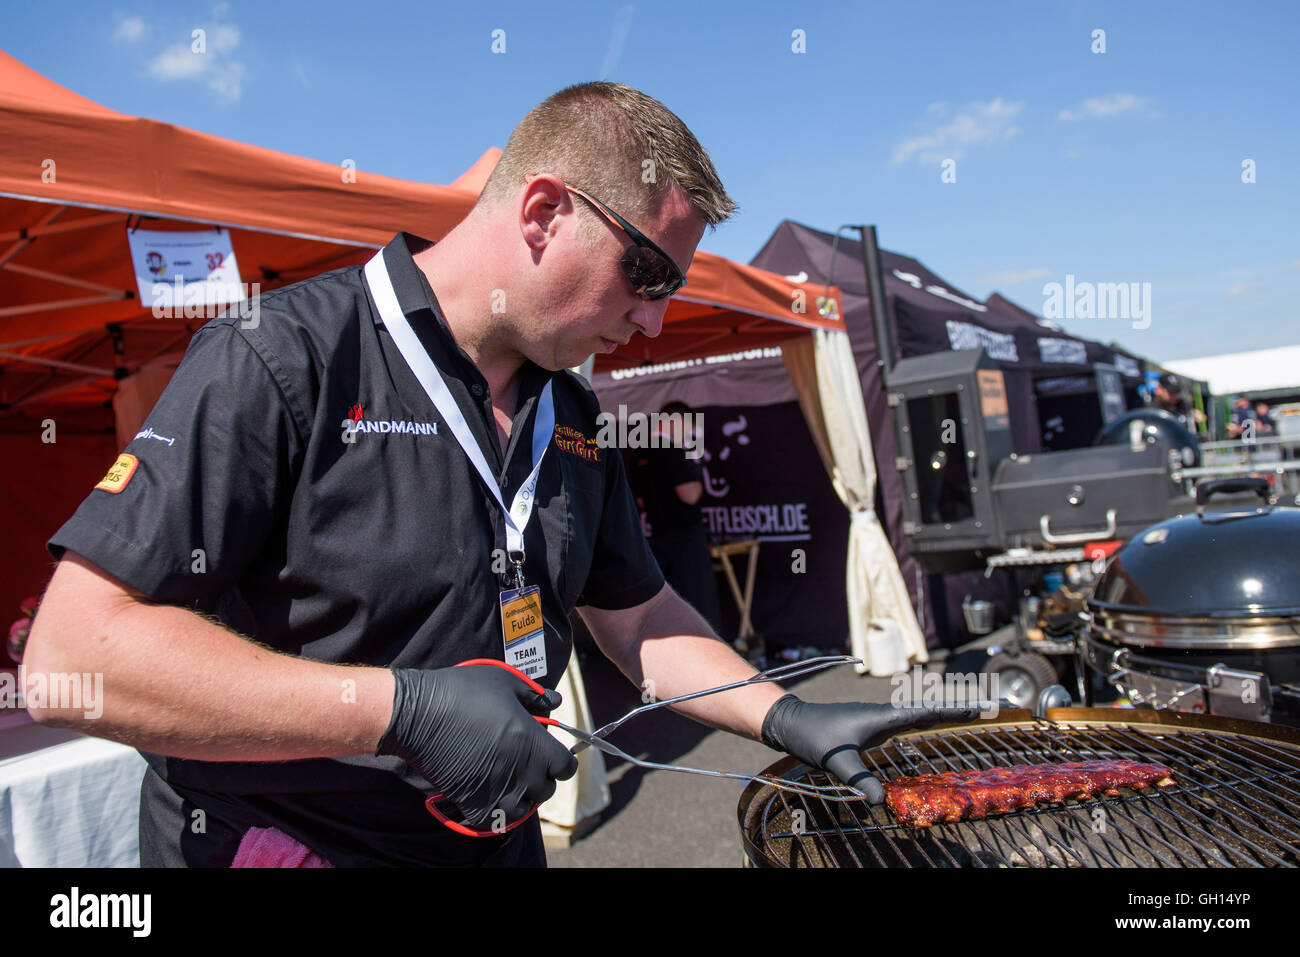 Fulda, Germany. 07th Aug, 2016. Patrick Damsma from Grill-team 'GutGlut'  cooks spare ribs during the 21st German BBQ Championships in Fulda,  Germany, 07 August 2016. Around 40 teams will be grilling in